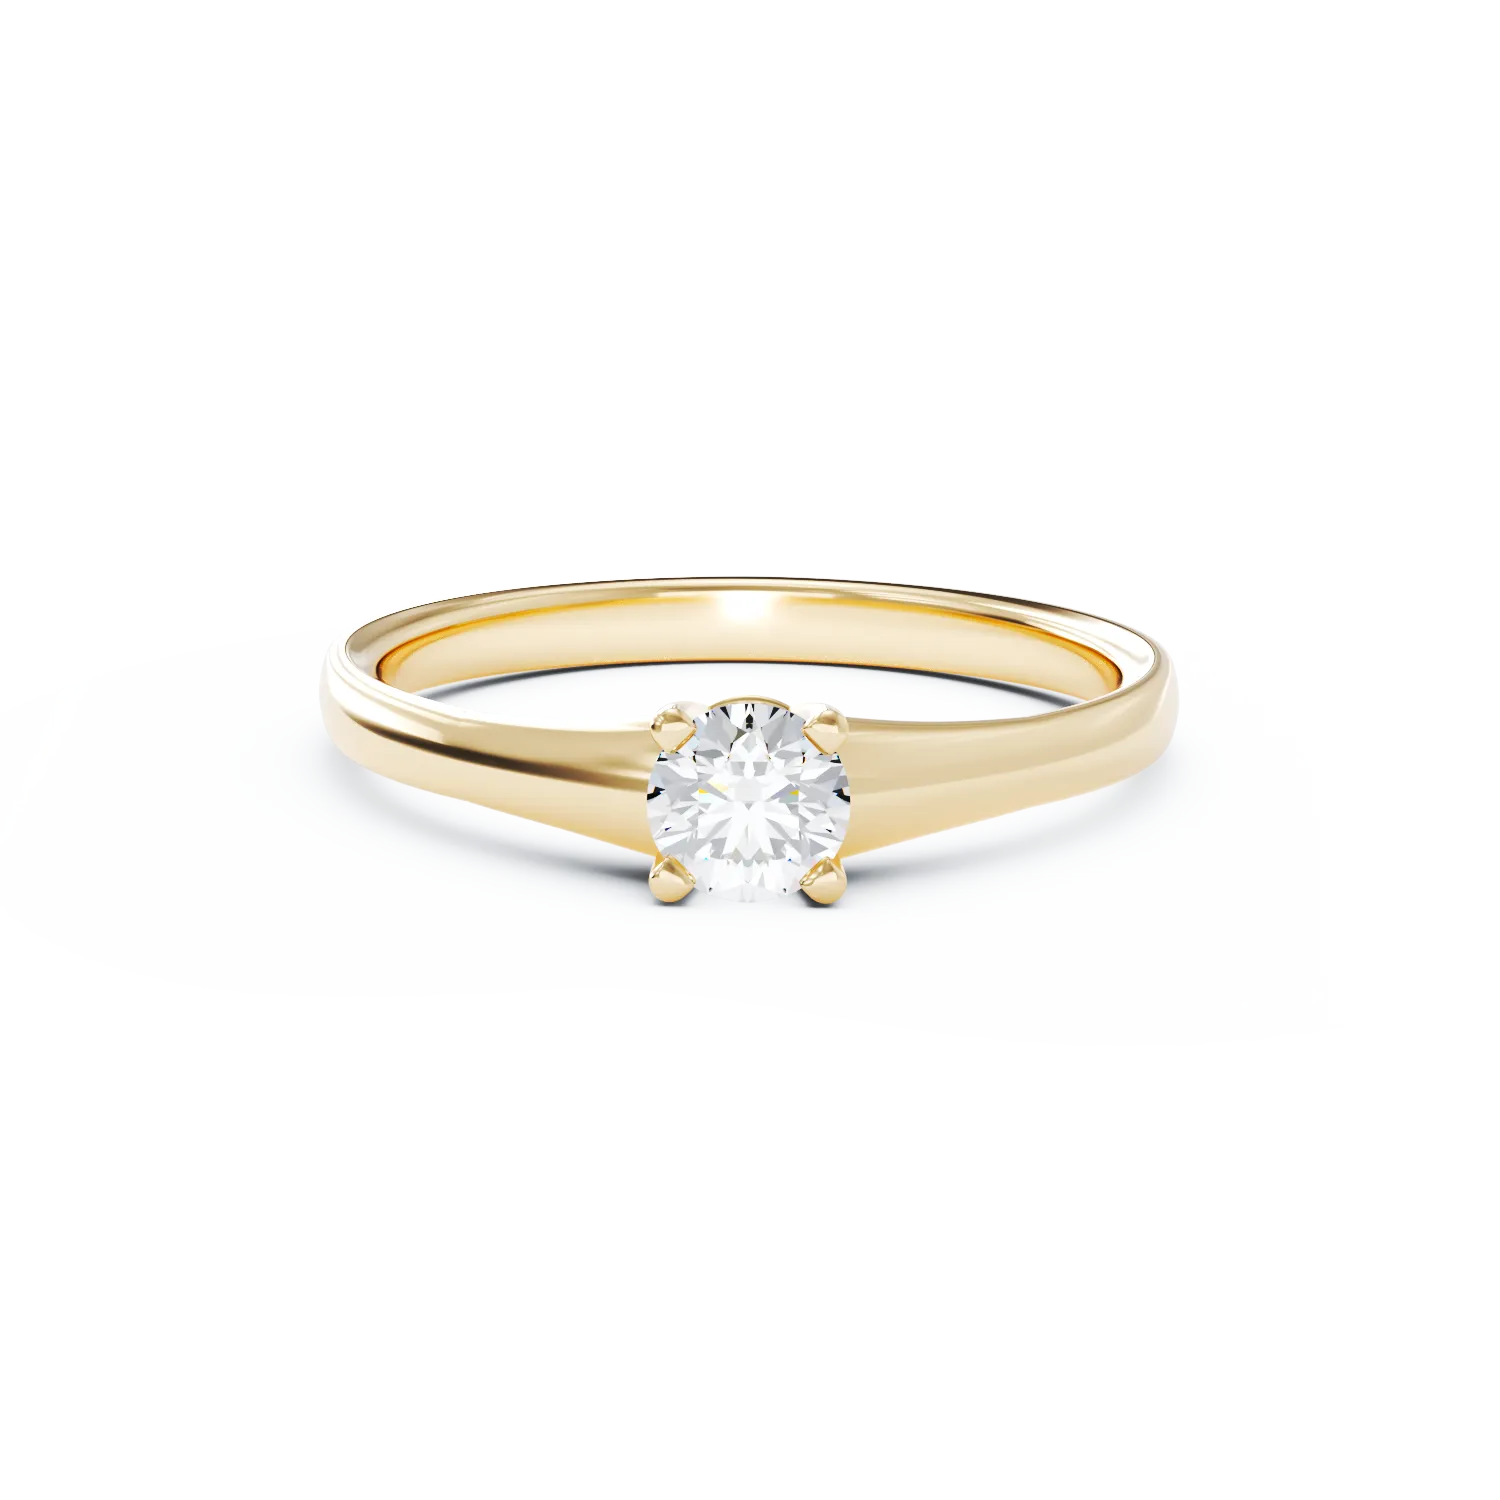 18K yellow gold engagement ring with 0.25ct diamond